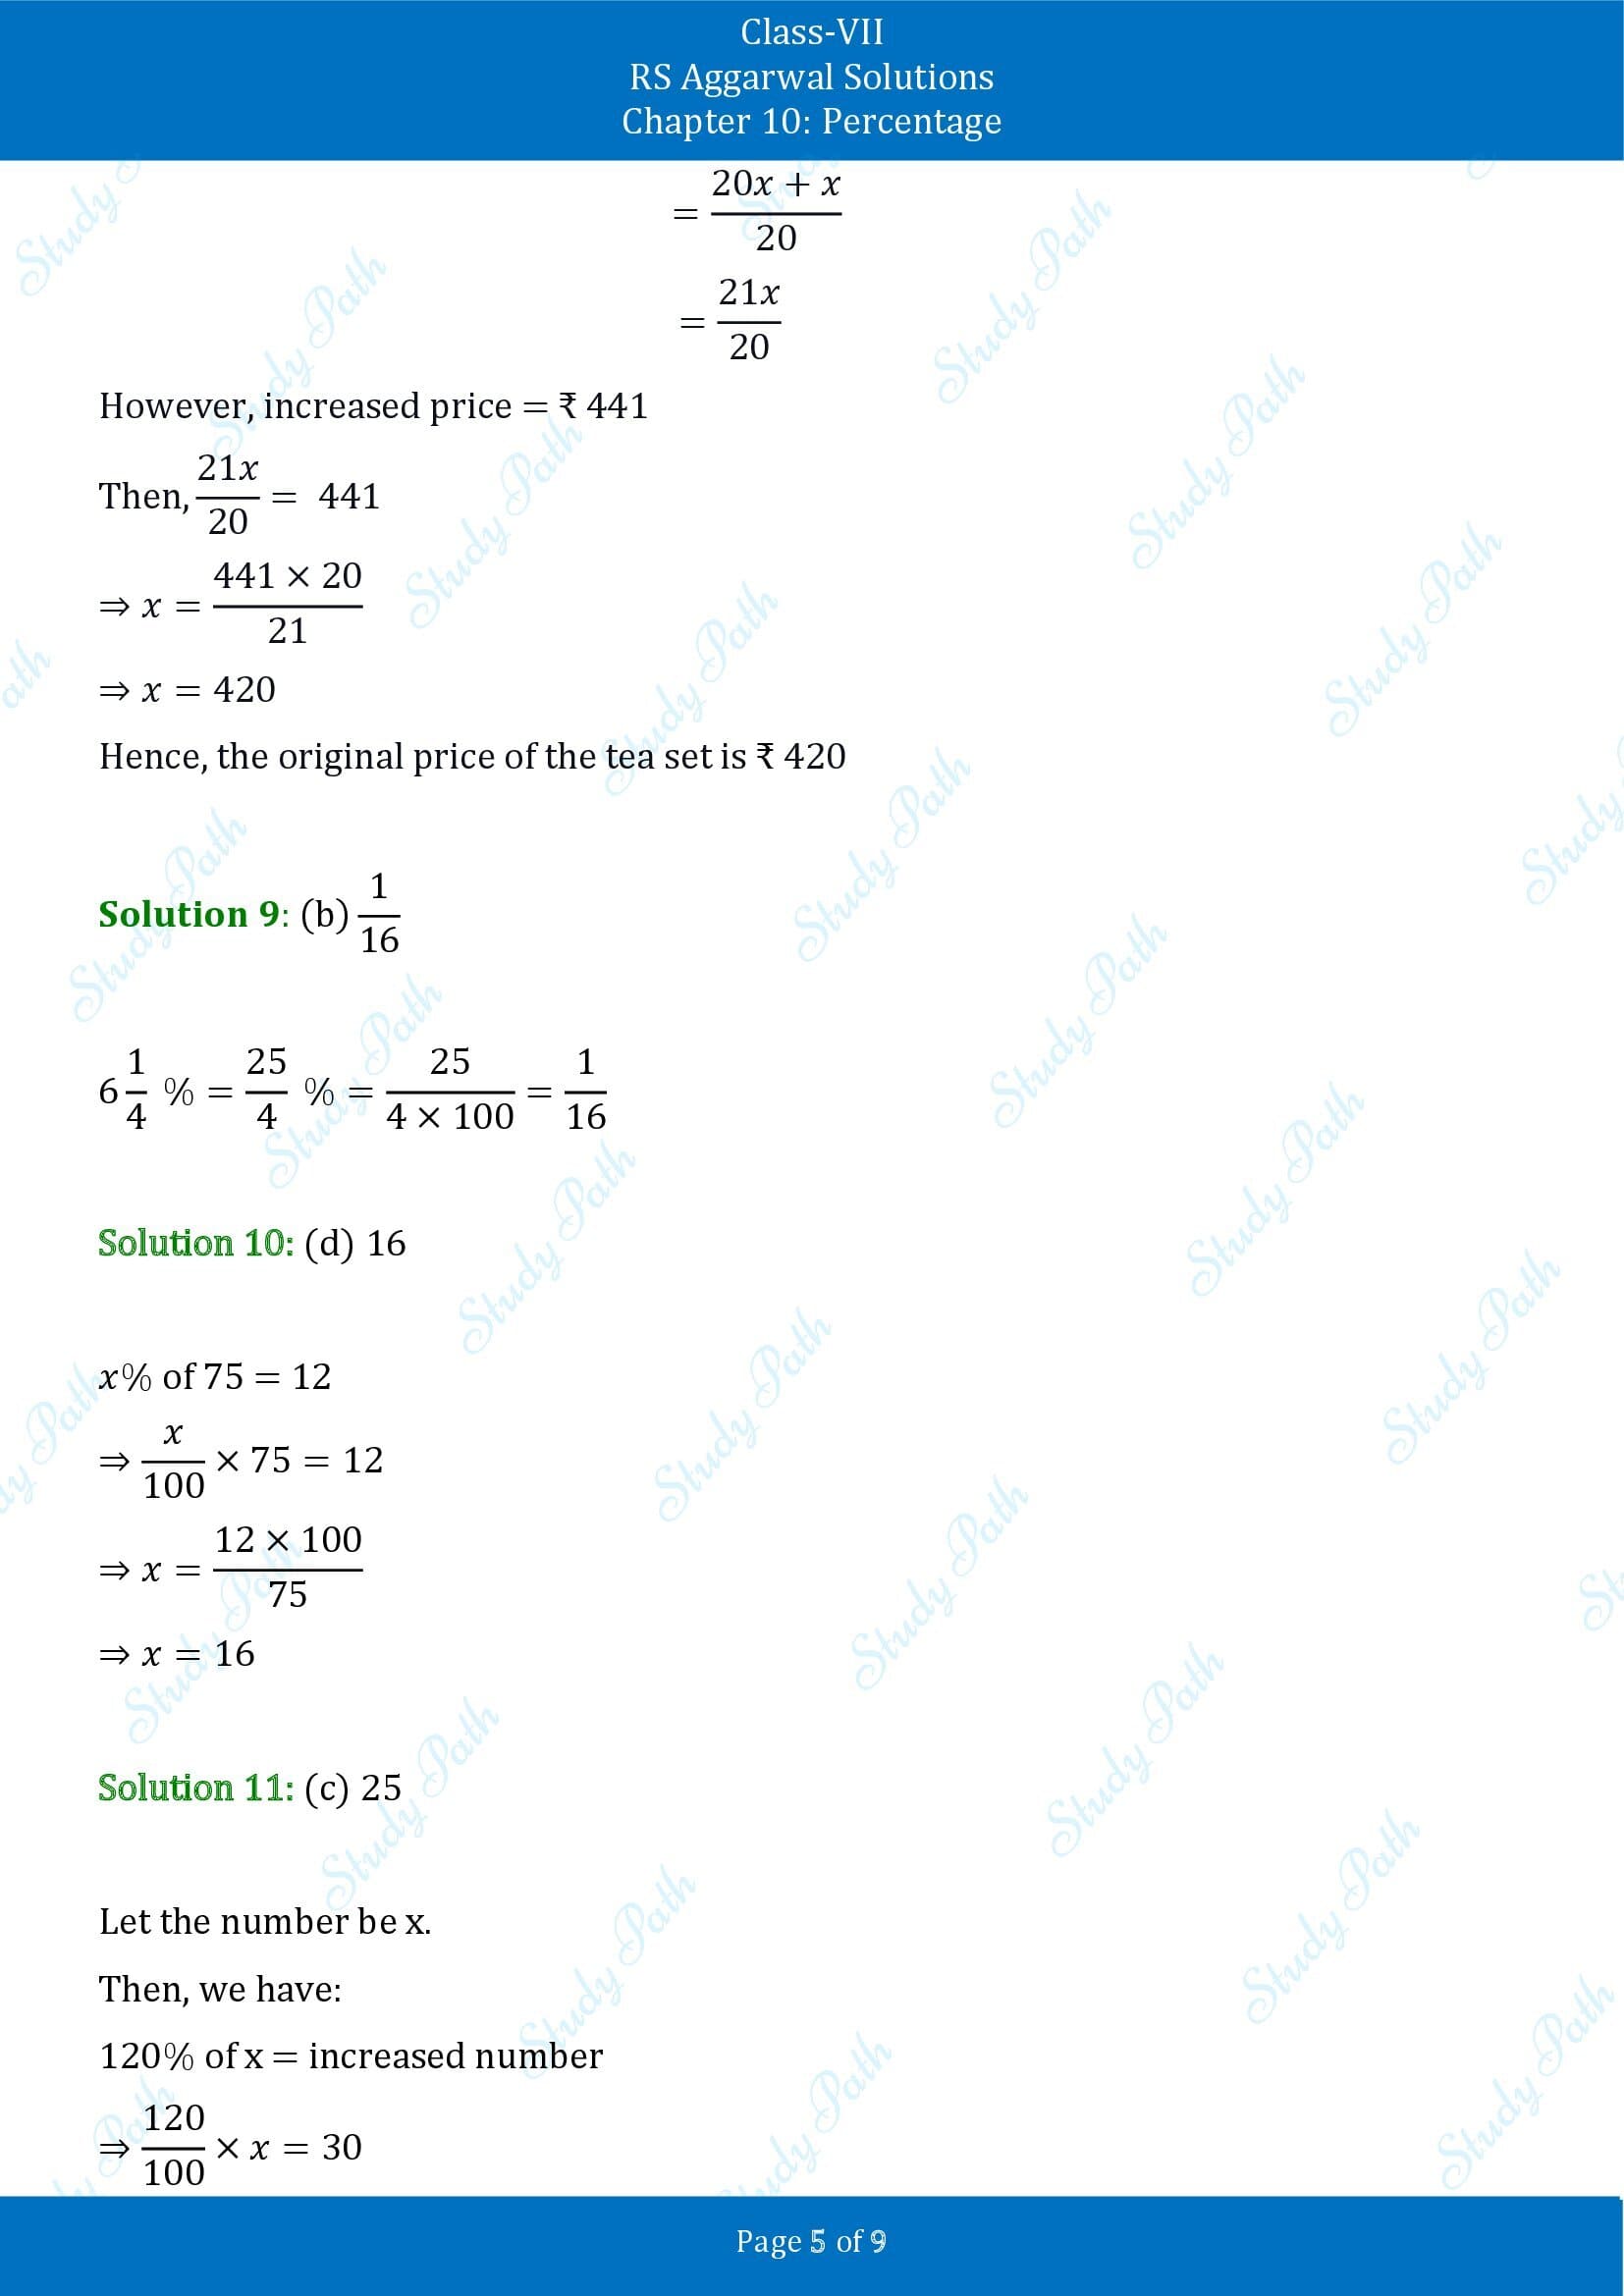 RS Aggarwal Solutions Class 7 Chapter 10 Percentage Test Paper 00005